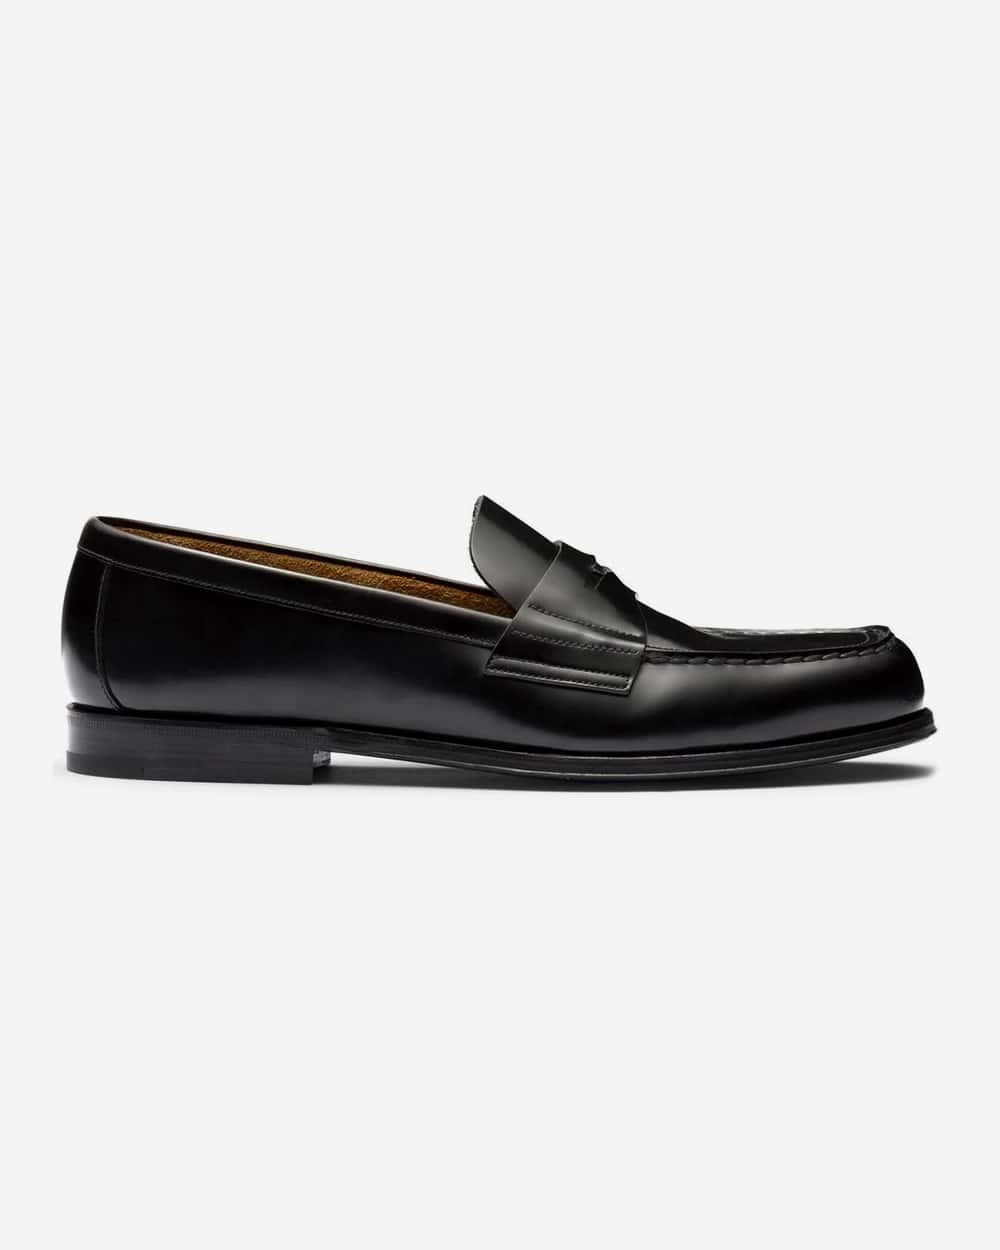 19 Luxury Loafer Brands Making The Highest Quality Slip Ons